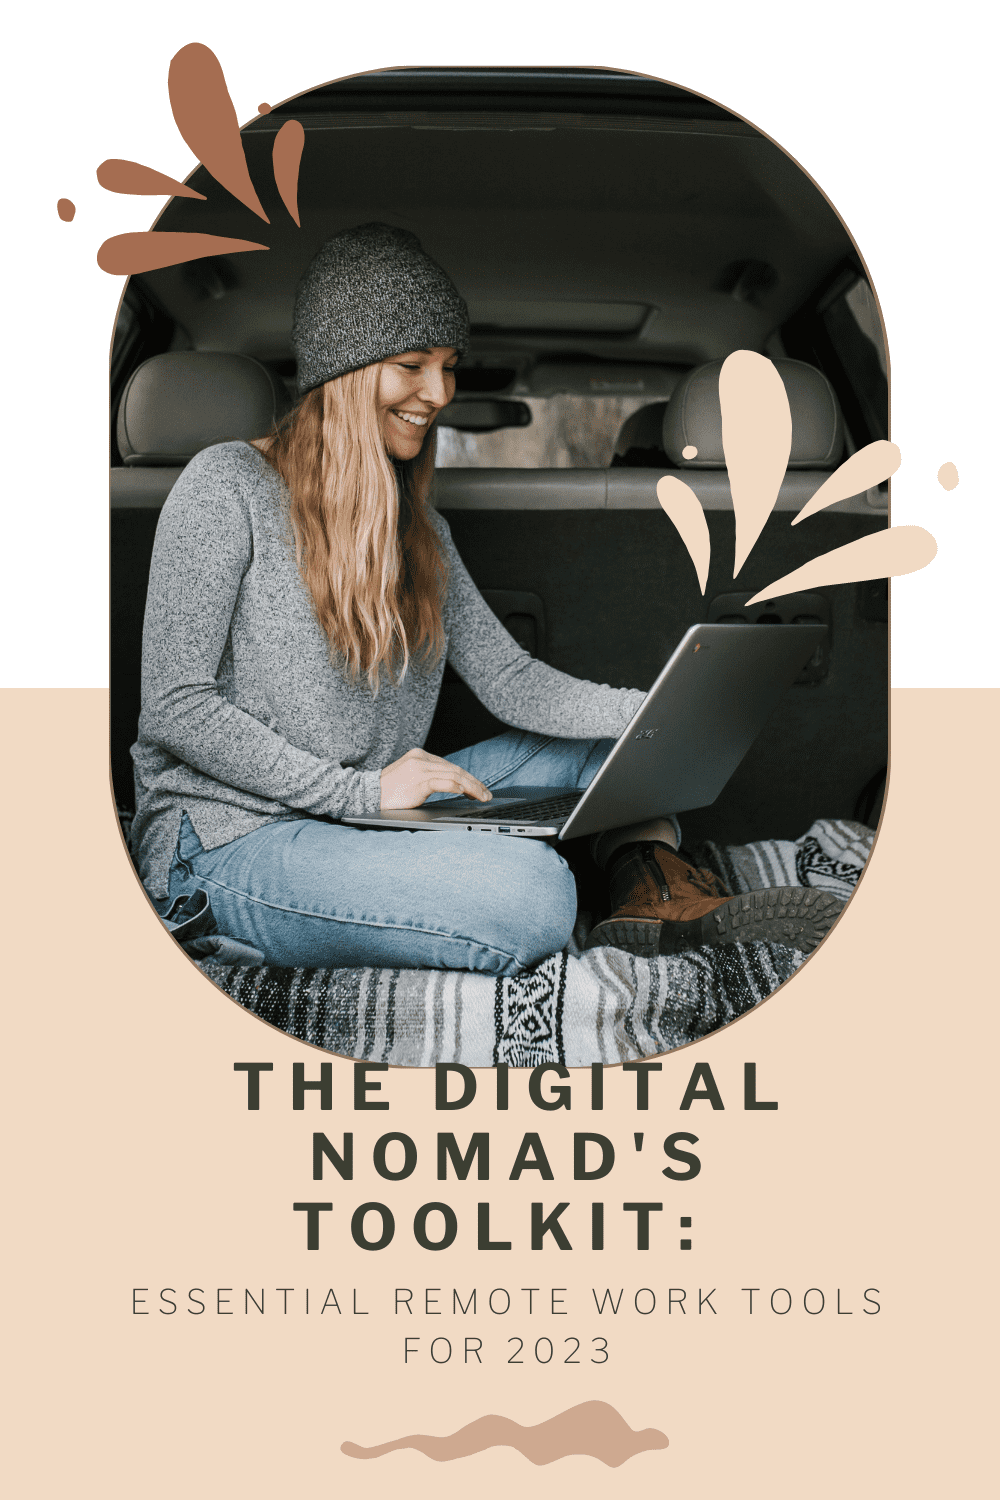 Cover Image for The Digital Nomad's Toolkit: Essential Remote Work Tools for 2023